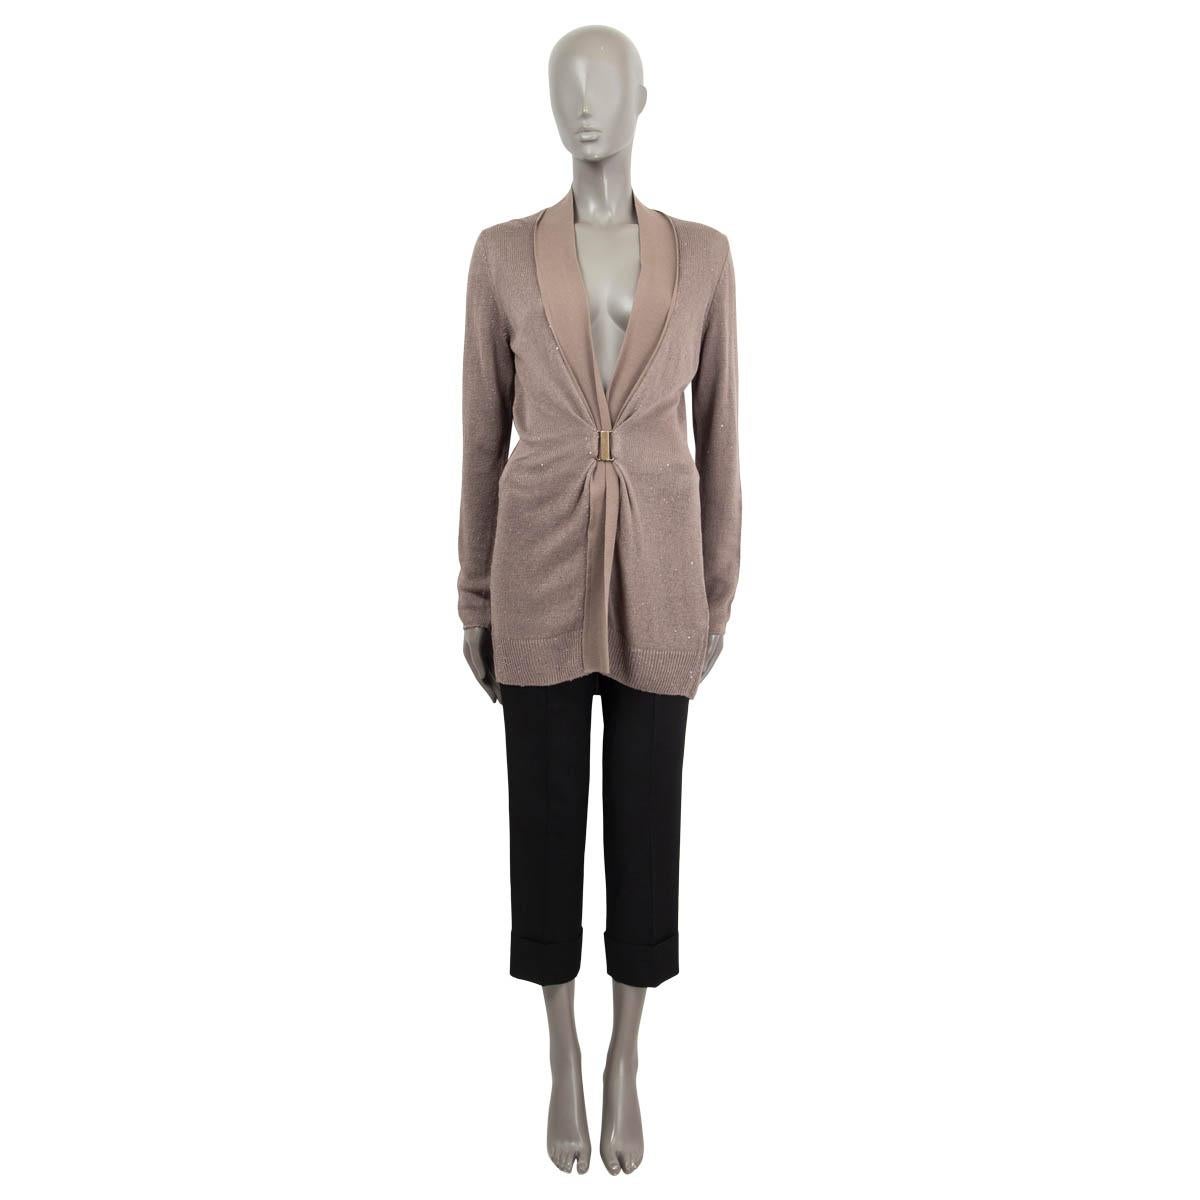 100% authentic Brunello Cucinelle cardigan in taupe linen (75%) and silk (25%) with micro sequins through out. Features a fine knit shawl collar and long cut silhouette. Closes with a hook in antique gold-tone on the front. Brand new with